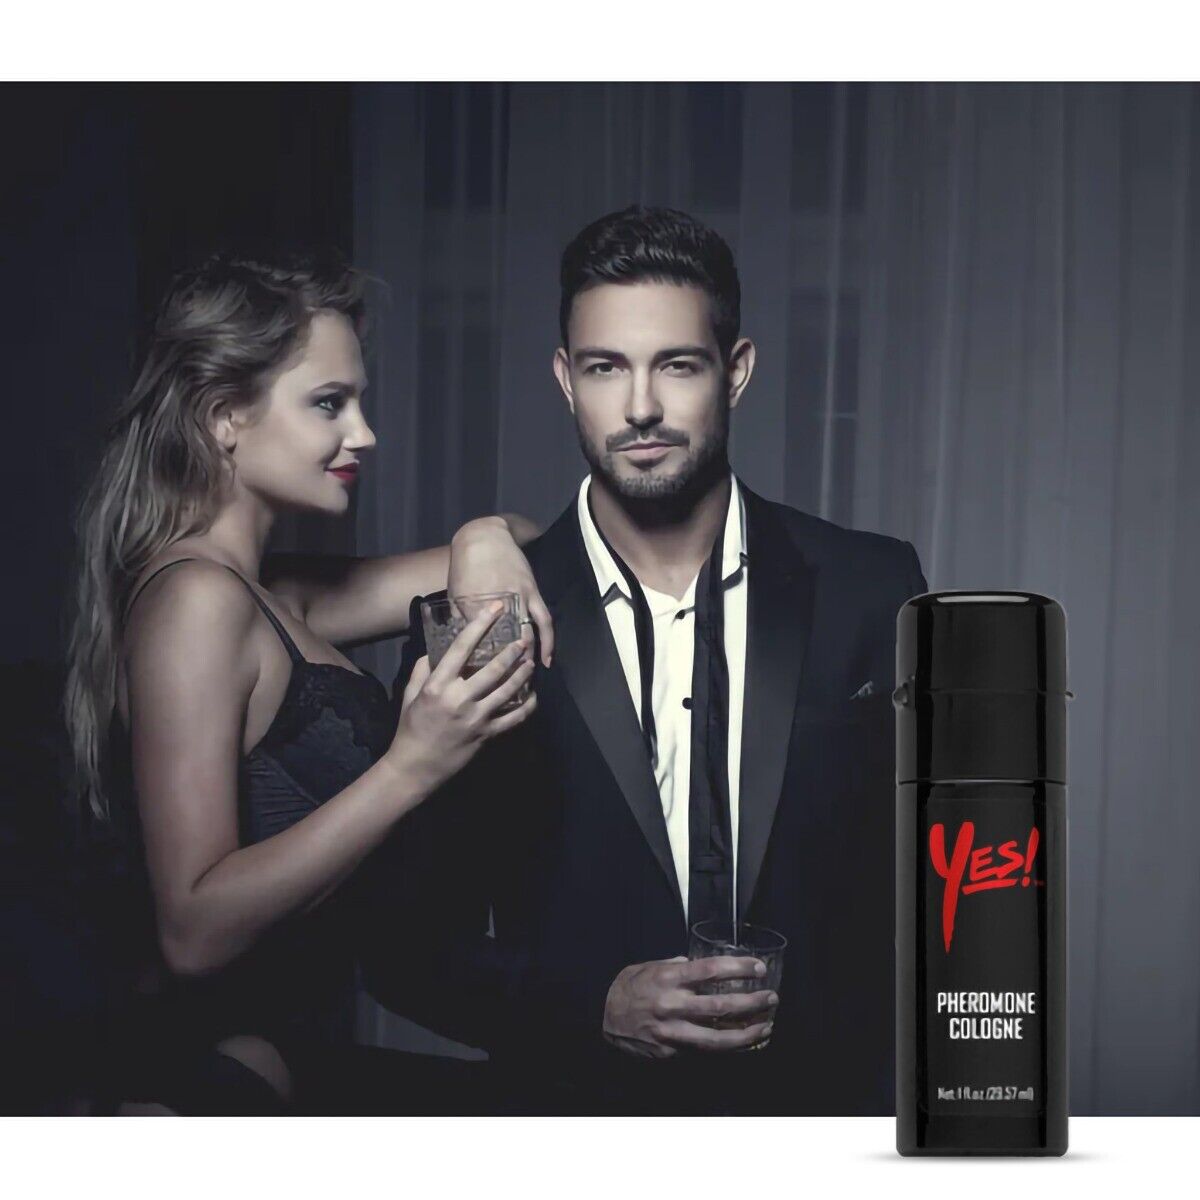 Yes Pheromone Cologne for men Attractant Perfume Attact Female Fragrance Spray